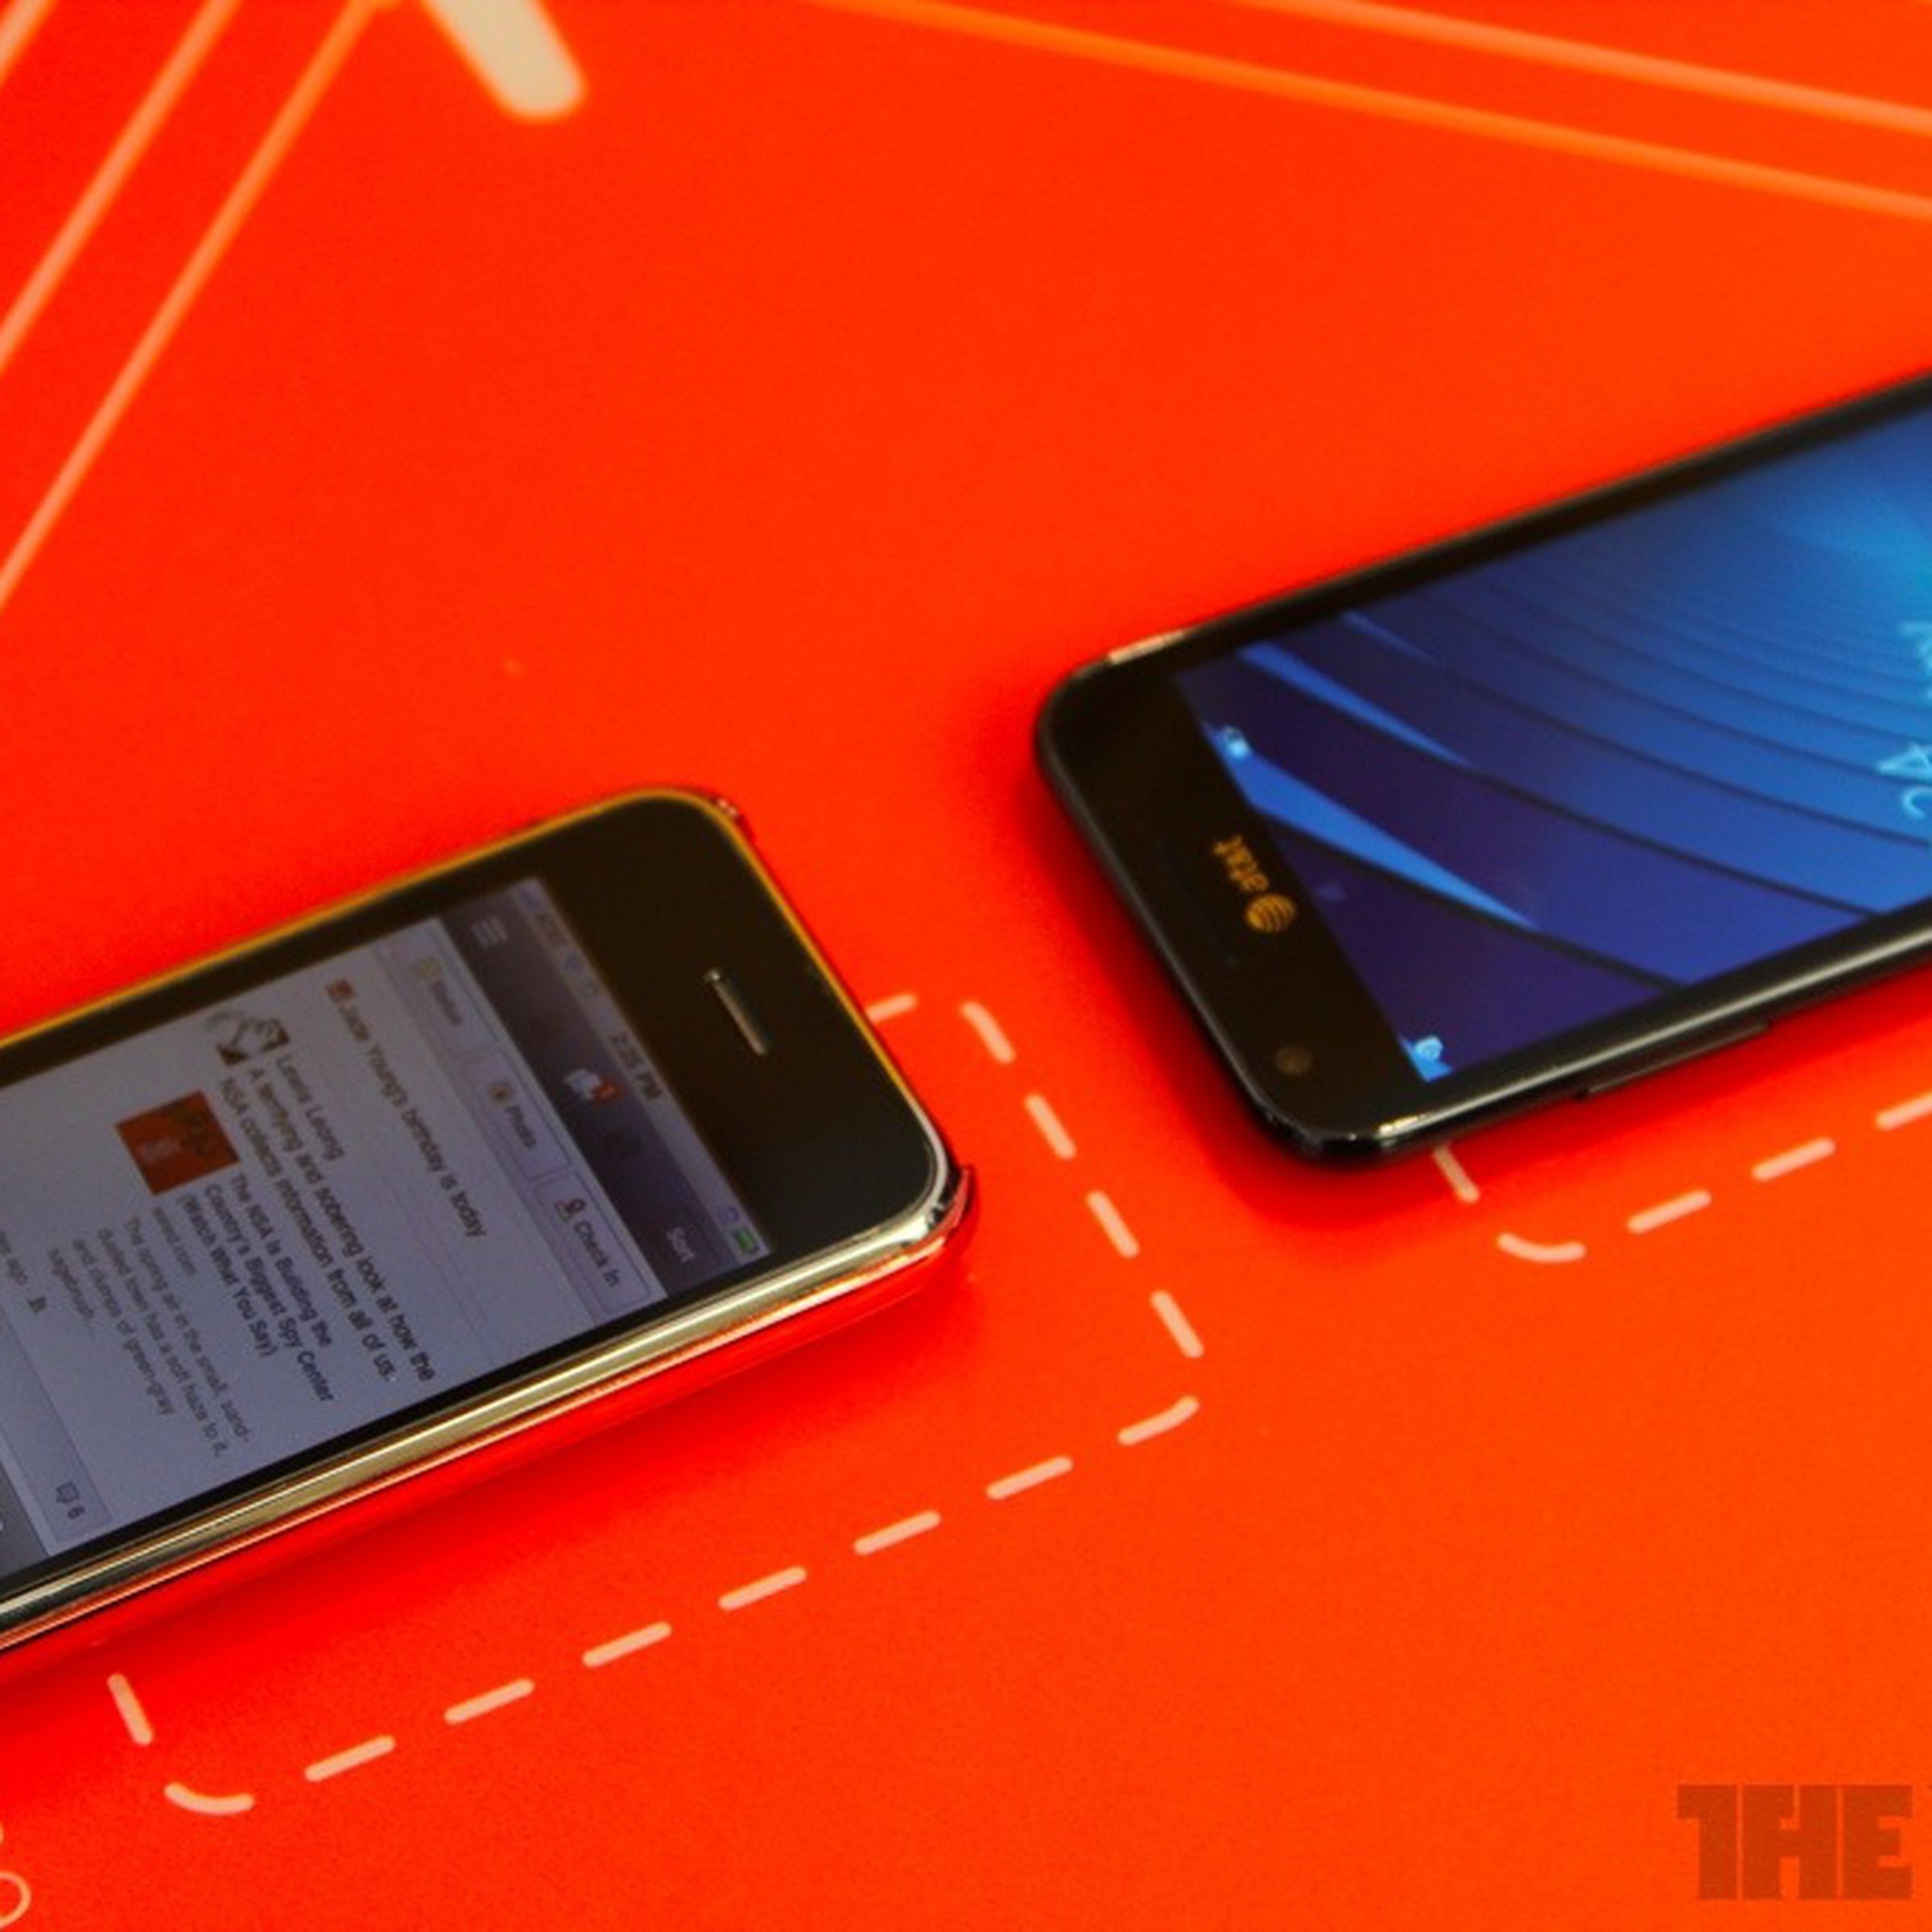 Gallery Photo: Smoked by Windows Phone hands-on pictures